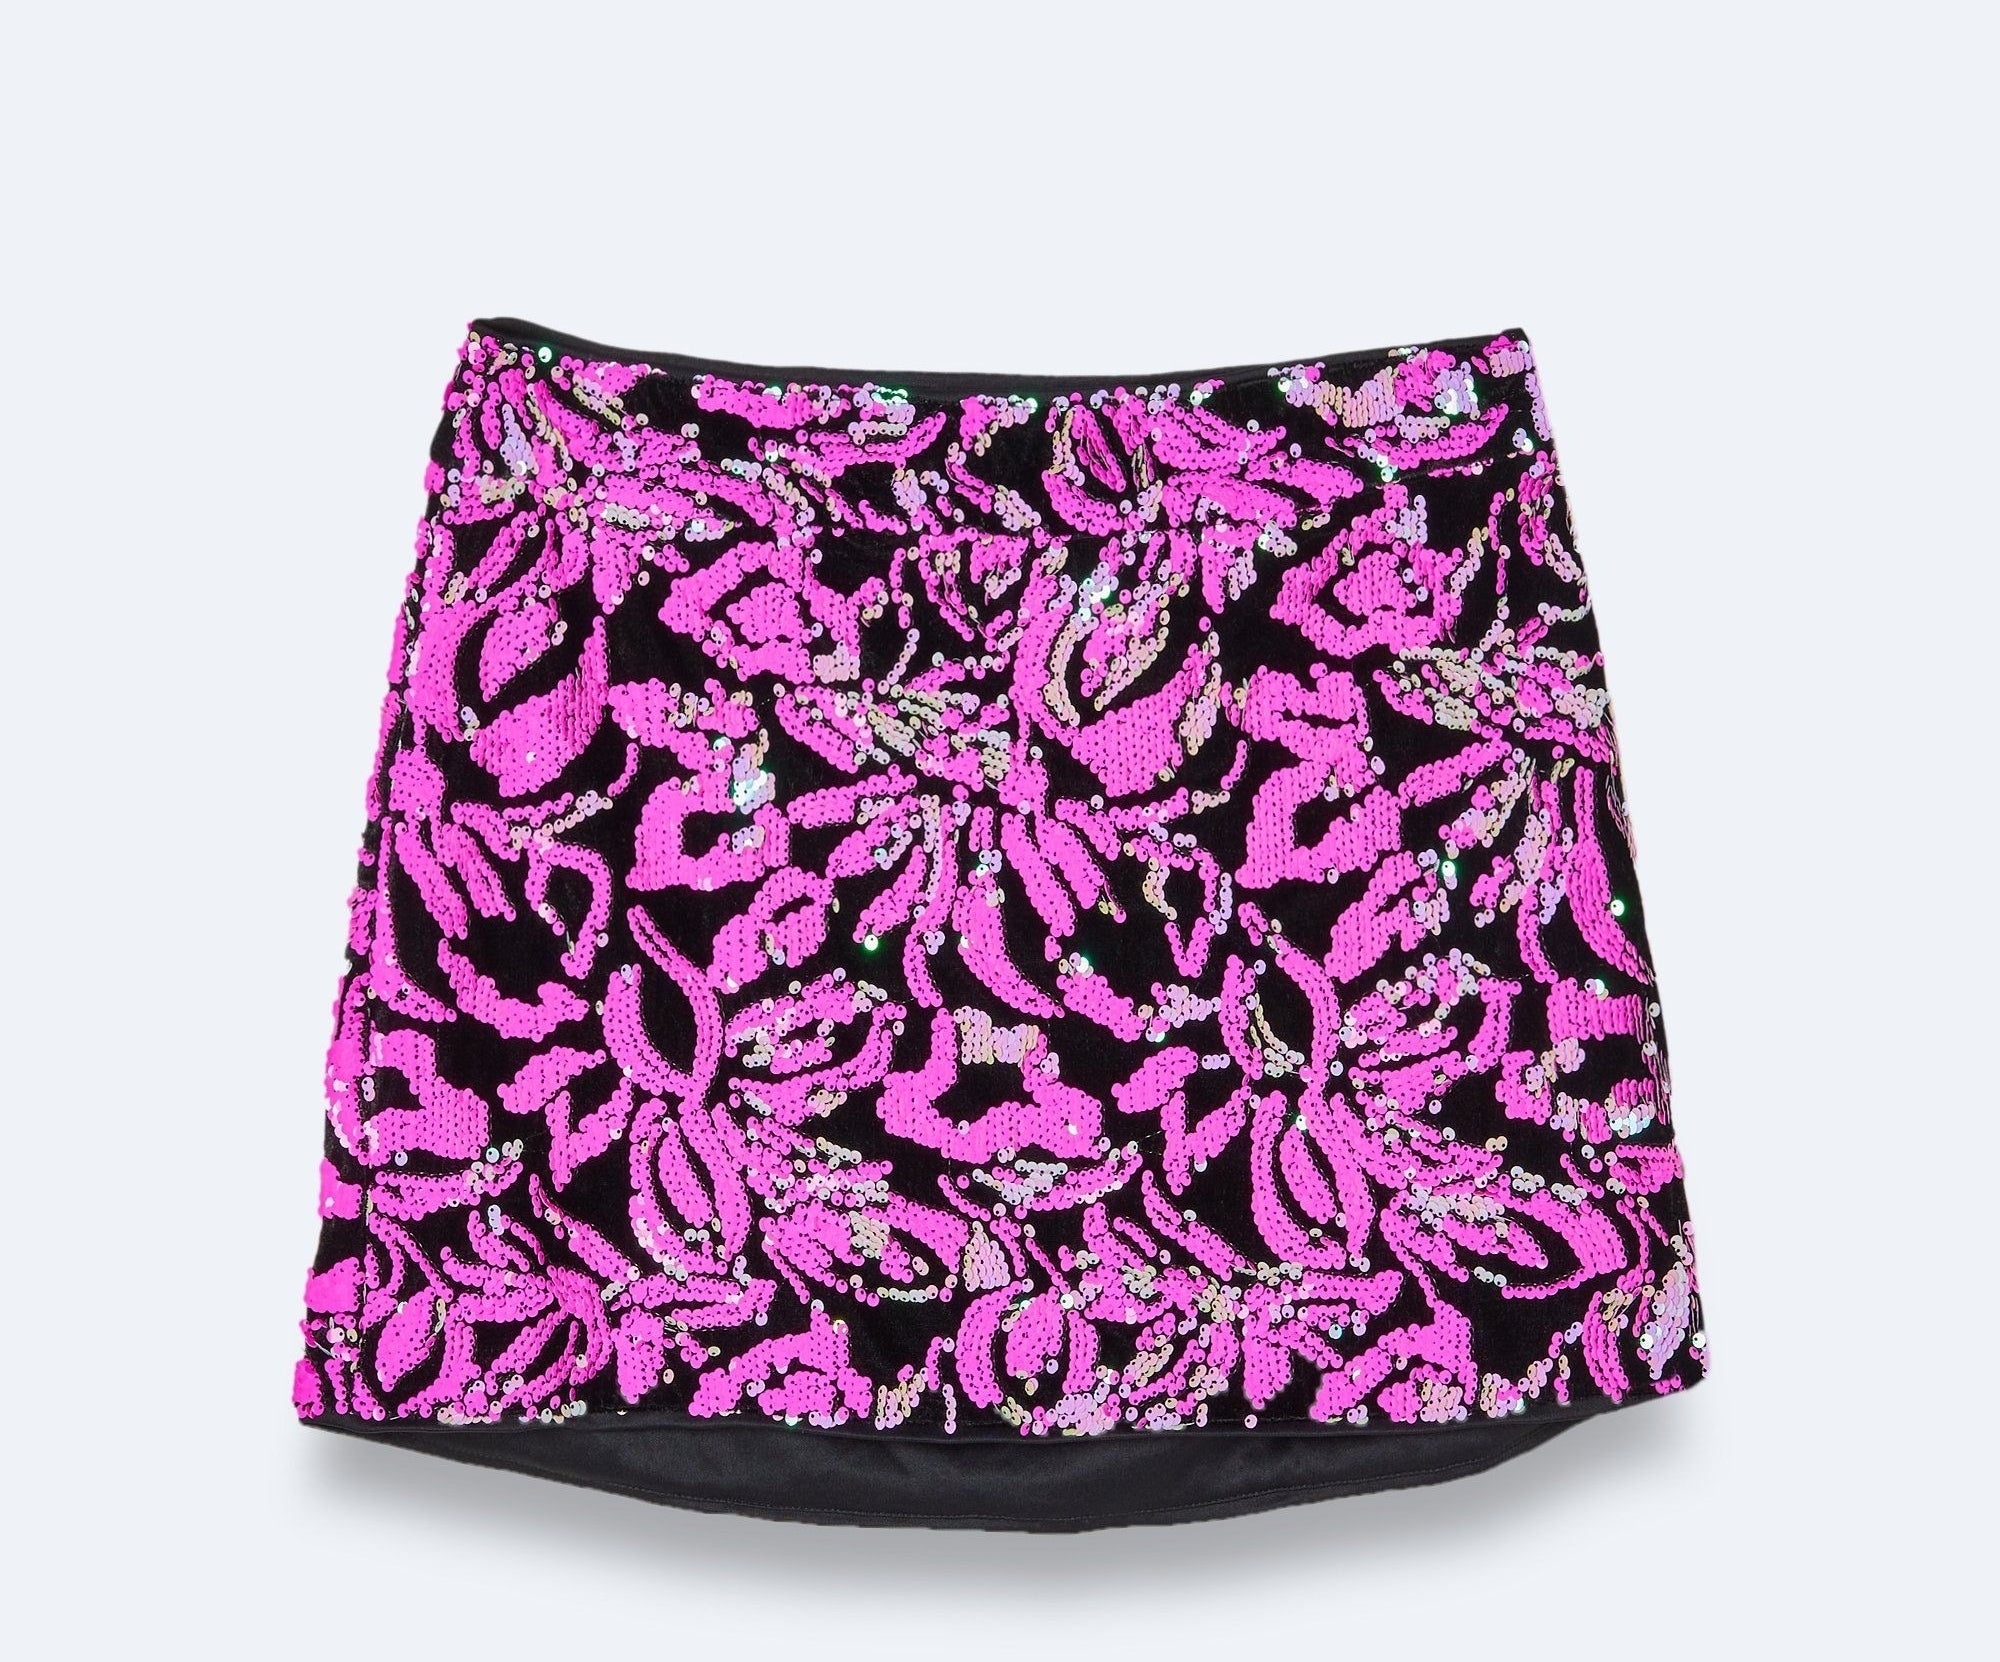 Floral patterned skirt on white background, available for purchase